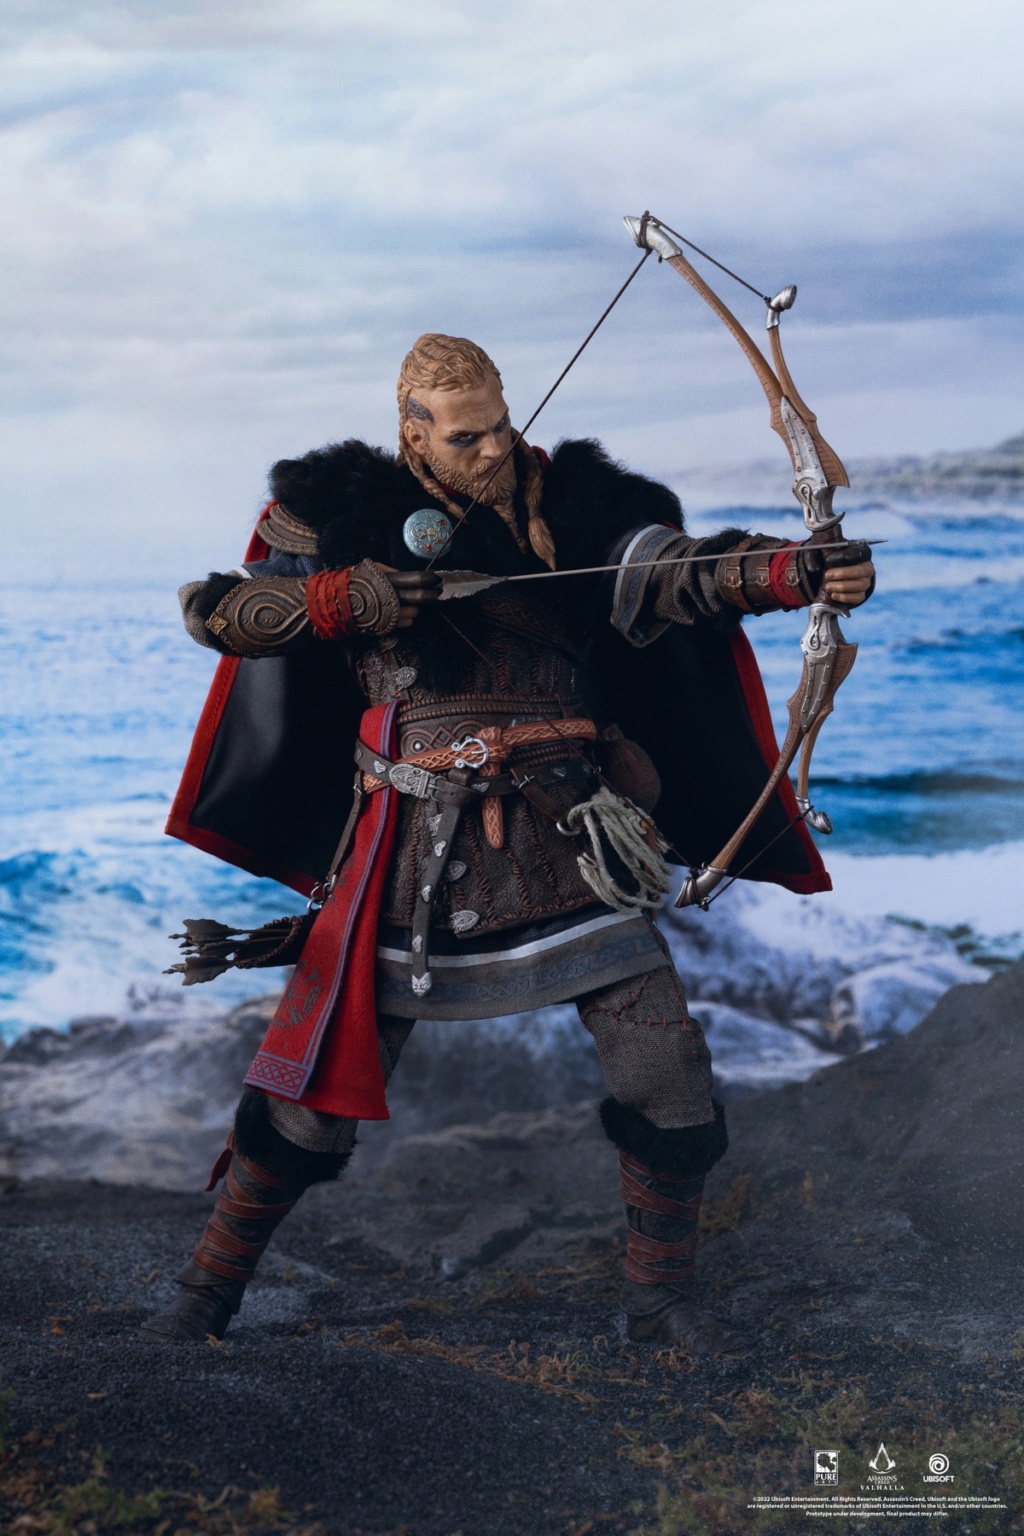 NEW PRODUCT: Pure Arts: 1/6 "Assassin's Creed: Valhalla" - Eivor Action Figure 9ce27810